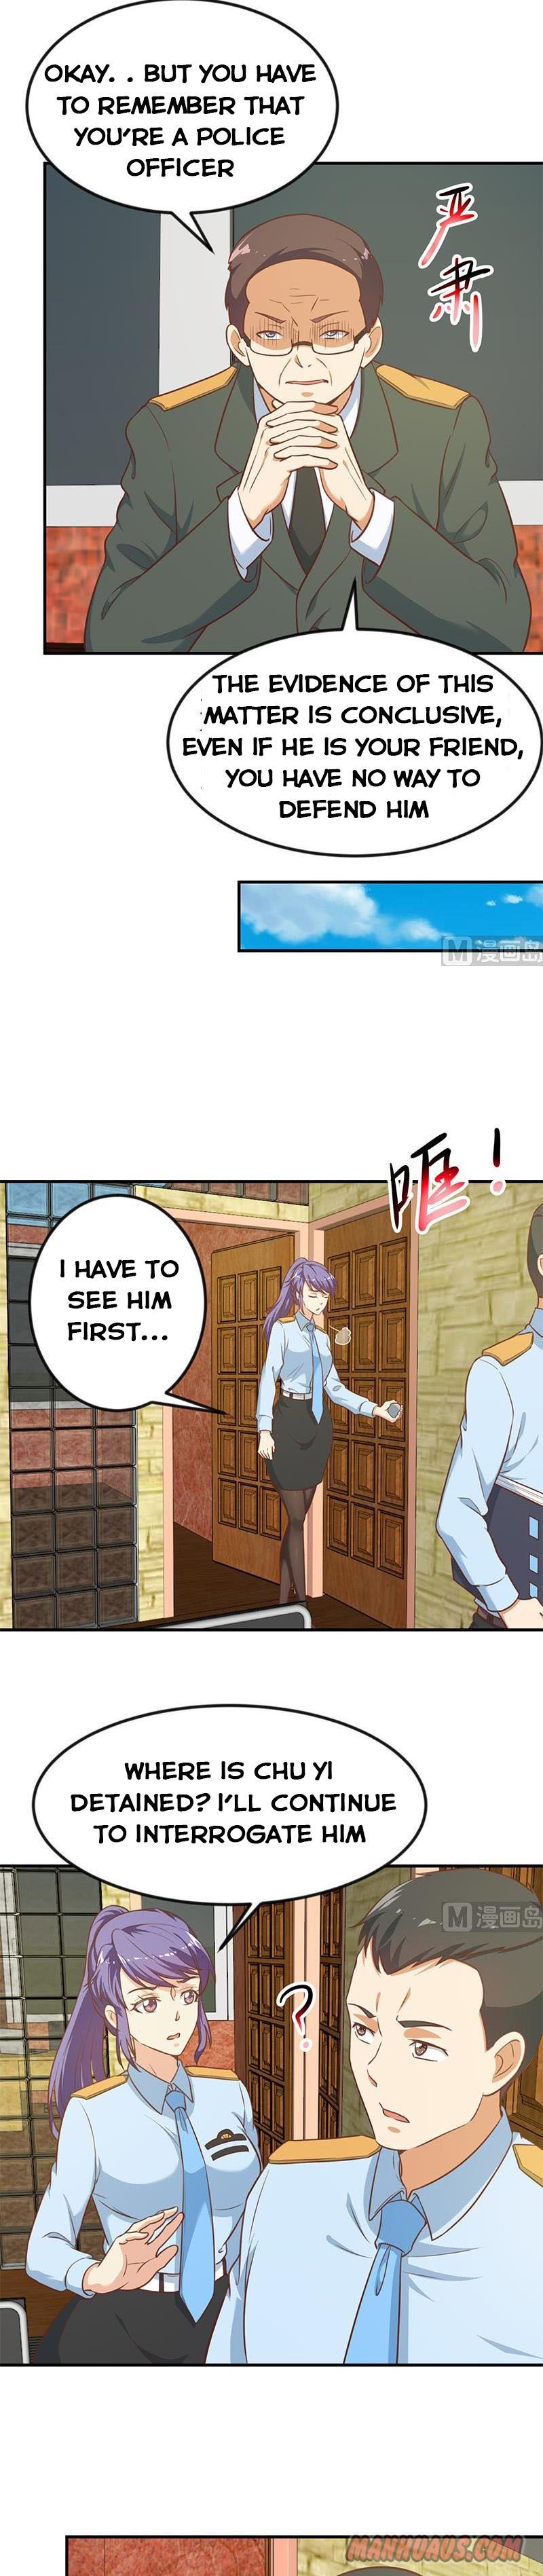 Cultivation Return on Campus Chapter 93 page 3